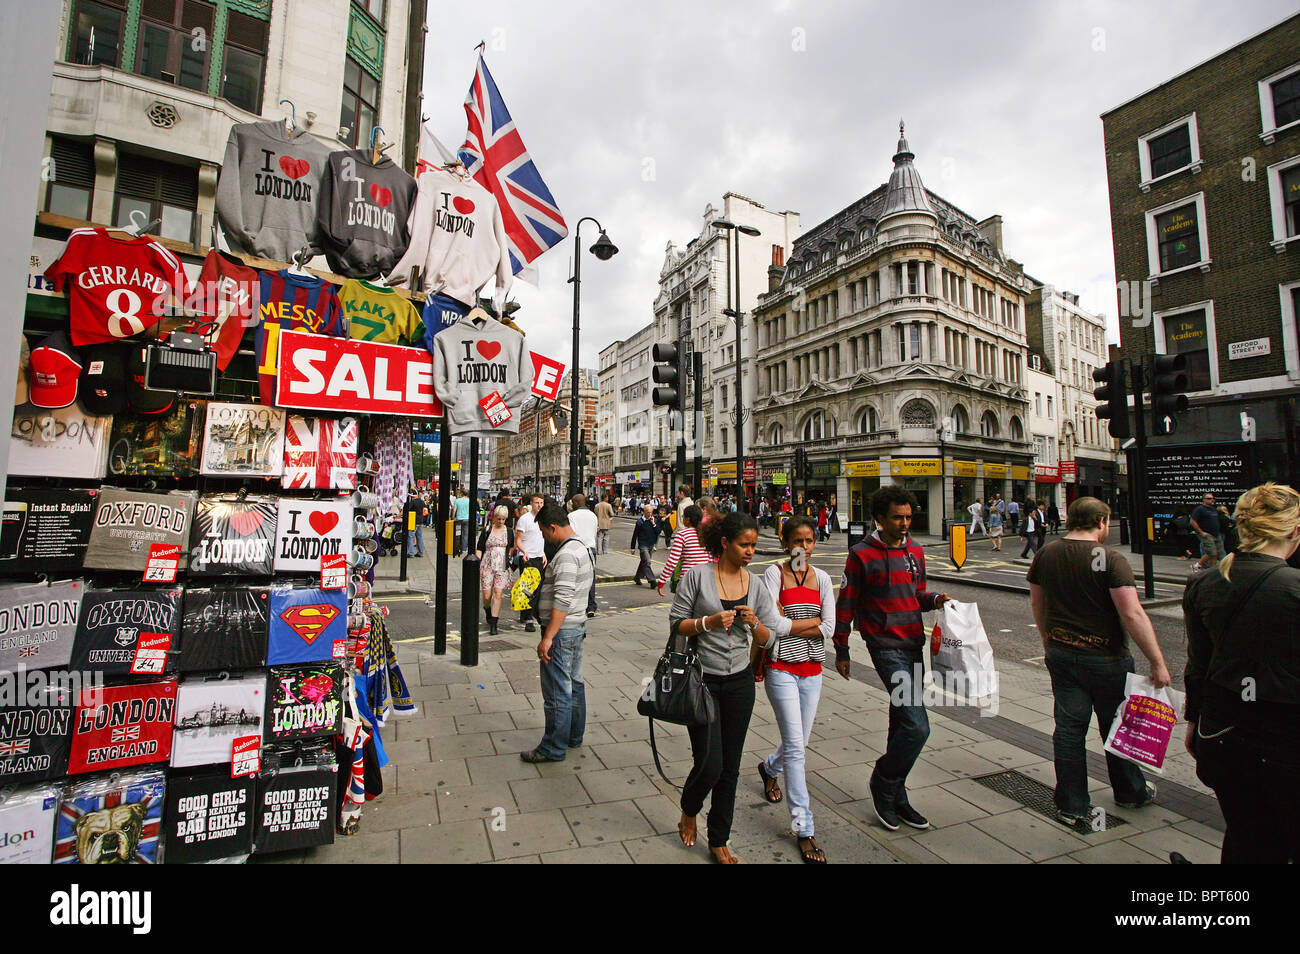 The hustle and bustle of Oxford st, London UK. The UK's busiest shopping street. Stock Photo